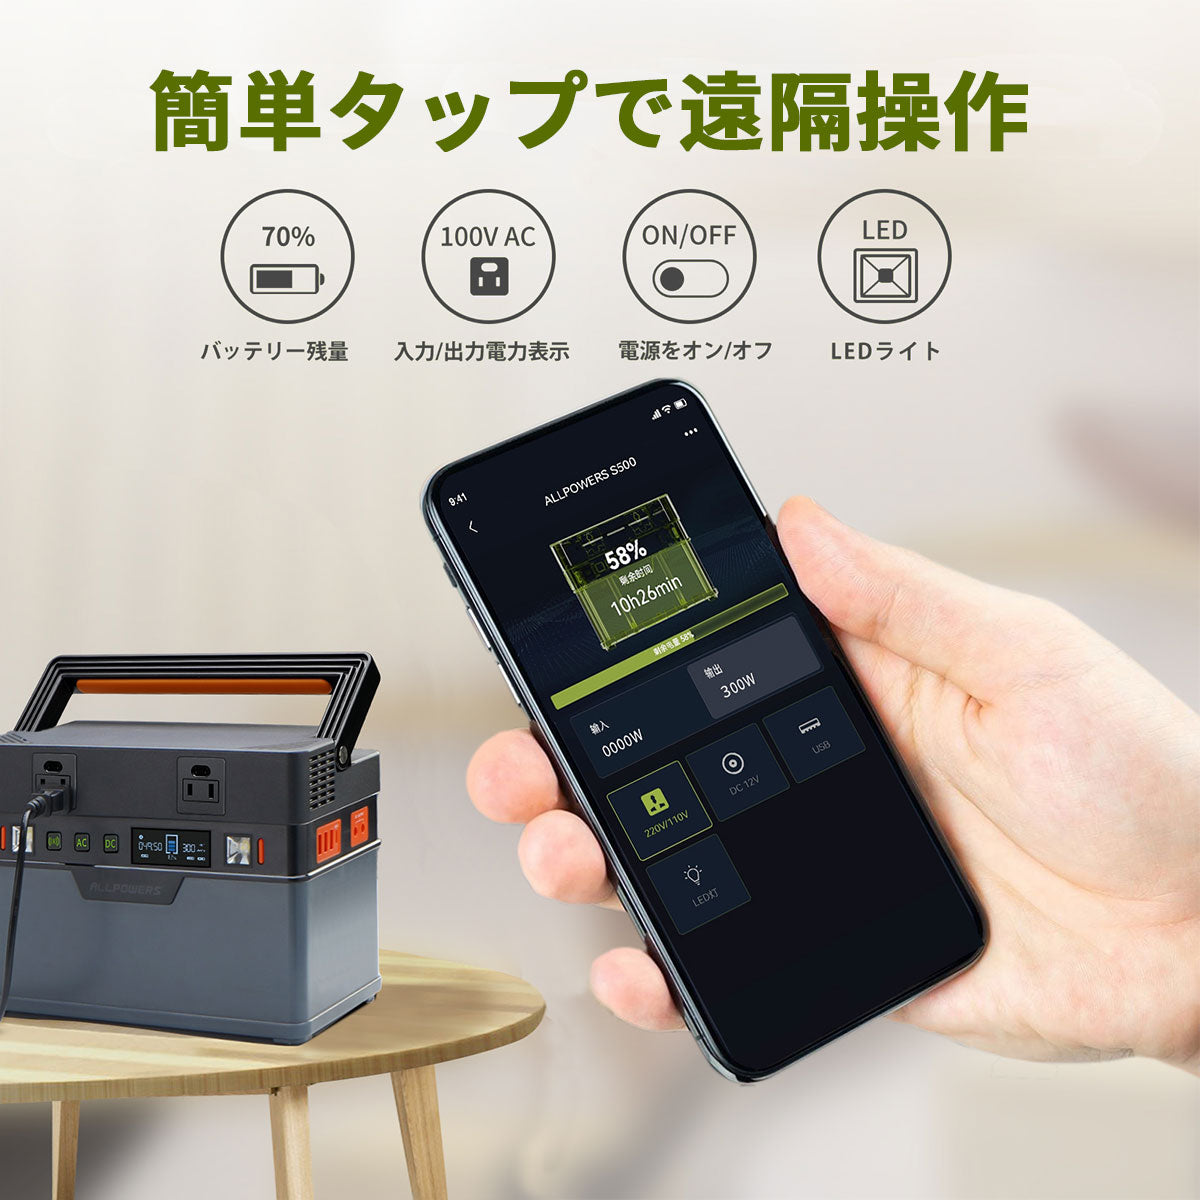 ALLPOWERS S300 ポータブル電源(288Wh/300W) – ALLPOWERS公式サイト